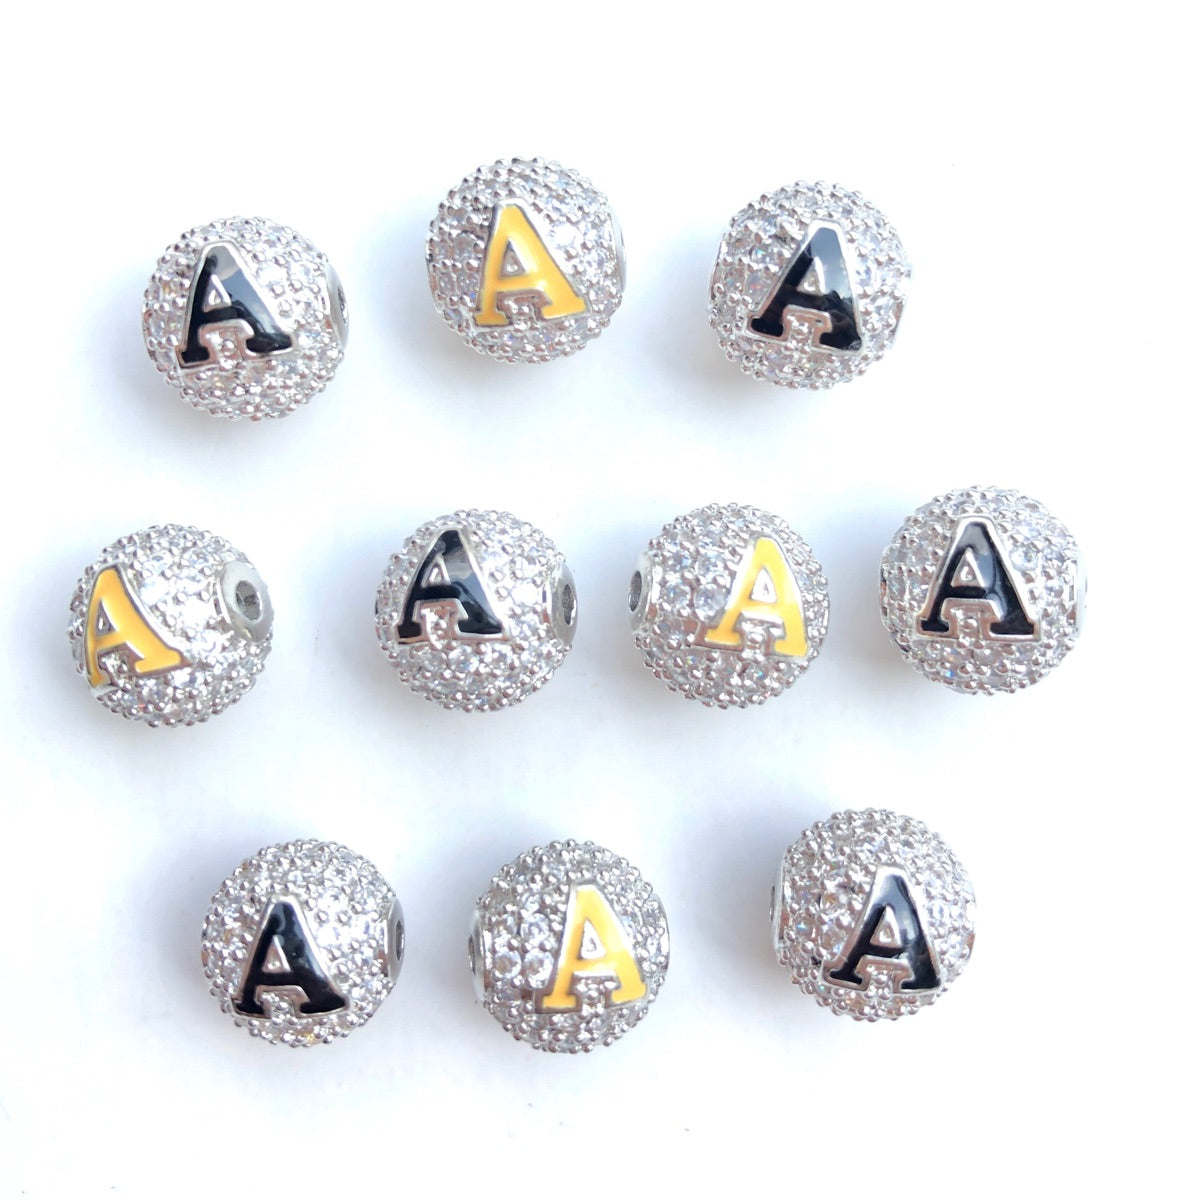 12pcs/lot 10mm Black Yellow Enamel CZ Paved A, Φ Initial Alphabet Letter Ball Spacers Beads Clear on Silver A CZ Paved Spacers 10mm Beads Ball Beads Greek Letters New Spacers Arrivals Charms Beads Beyond